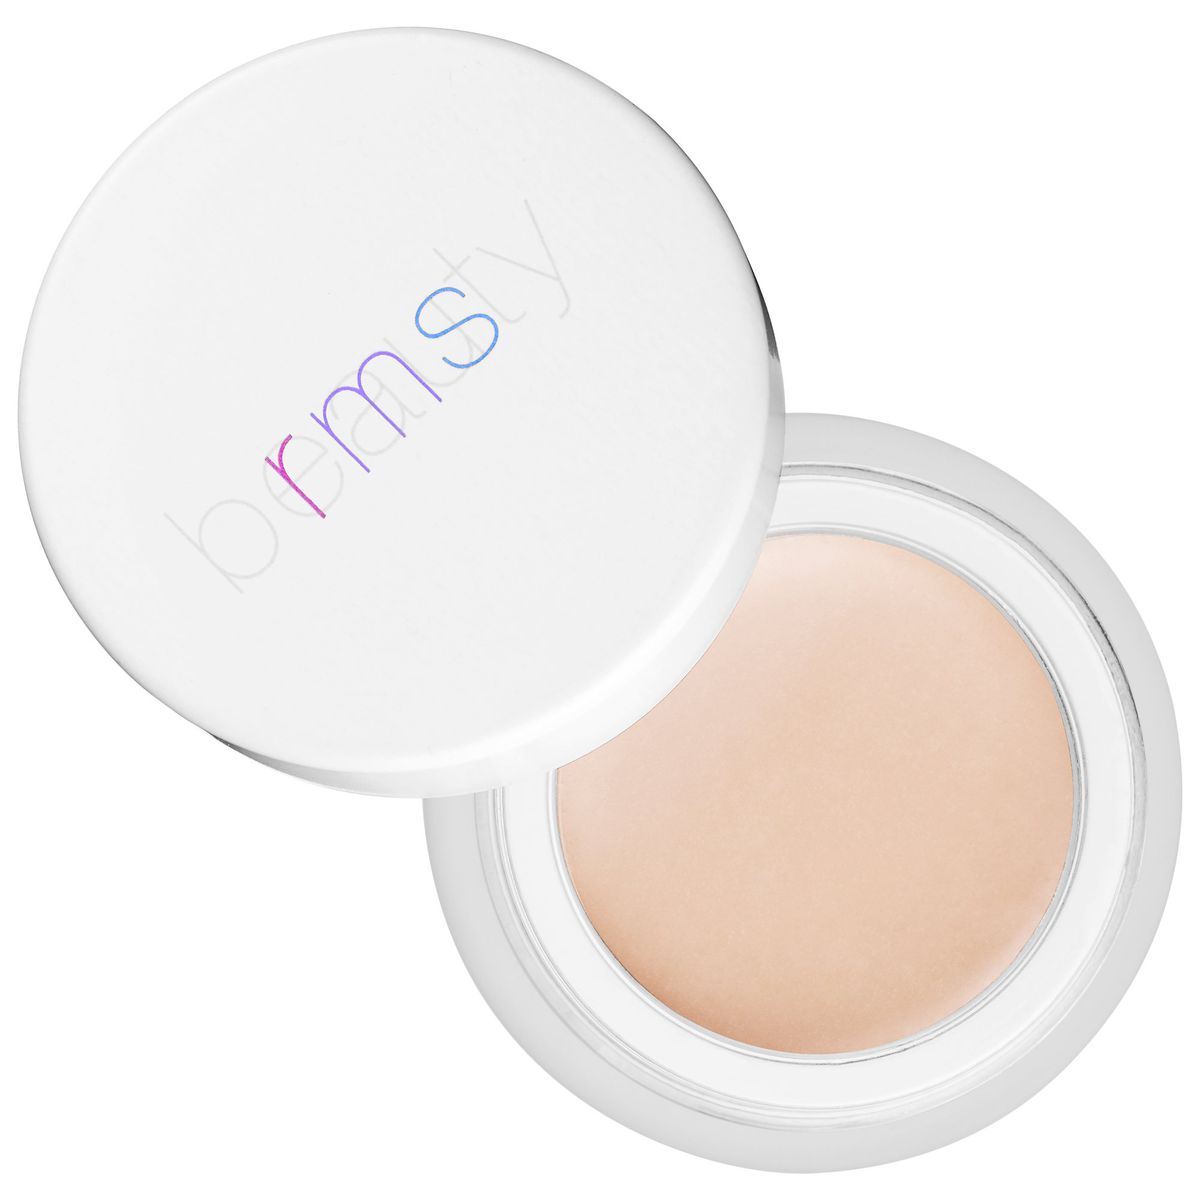 RMS Beauty Un Cover-Up Concealer/Foundation, $36